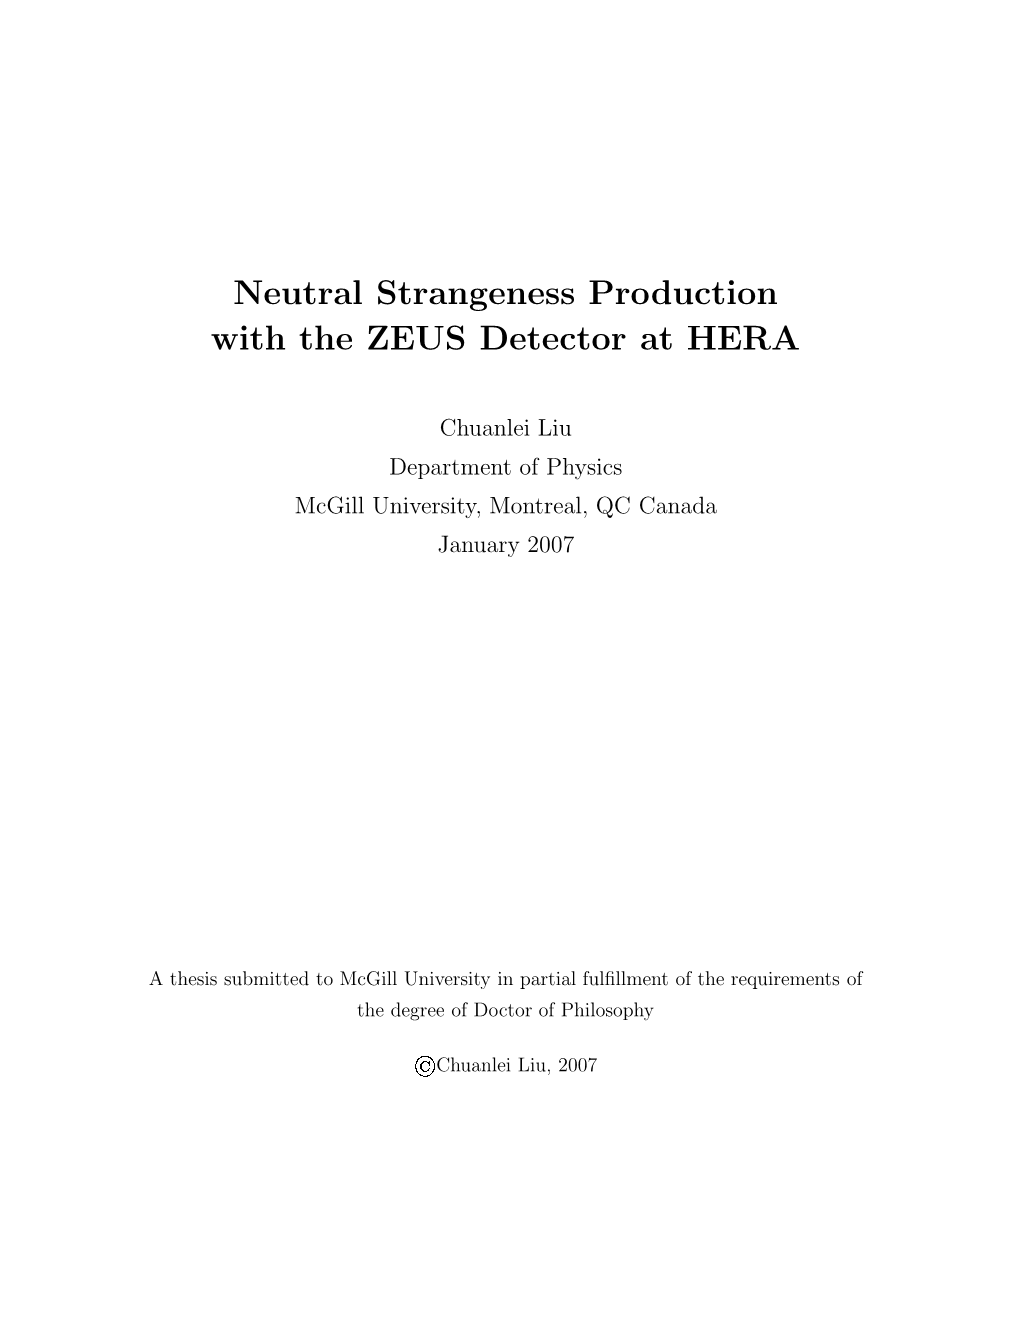 Neutral Strangeness Production with the ZEUS Detector at HERA